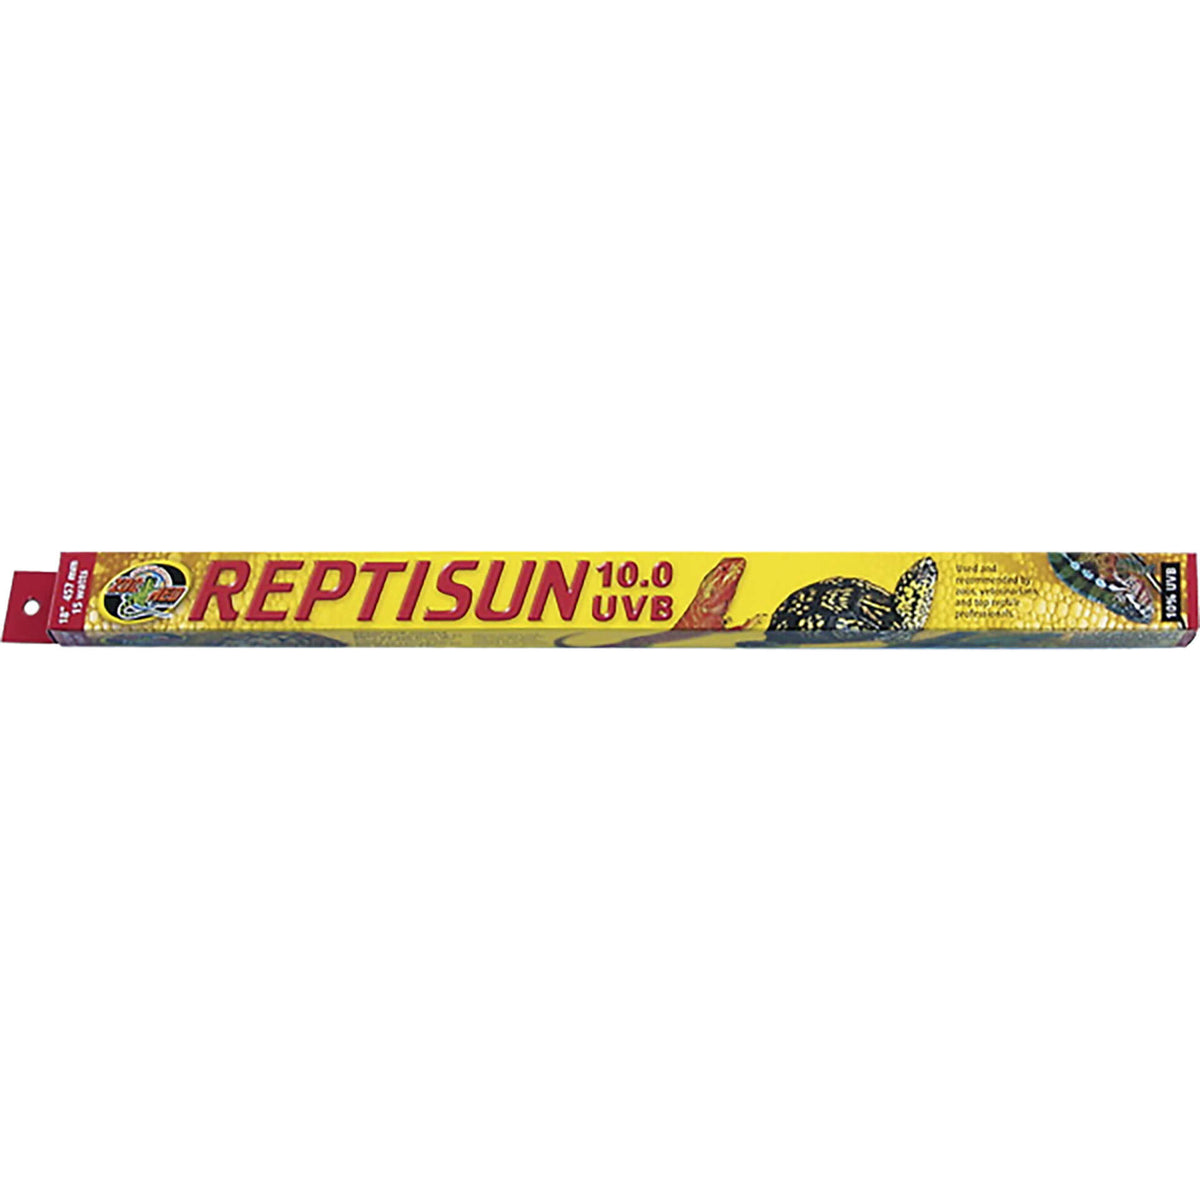 Zoo Med ReptiSun T8 HO 10.0 UVB Tube 45cm 15w - In Store Only Pick Up